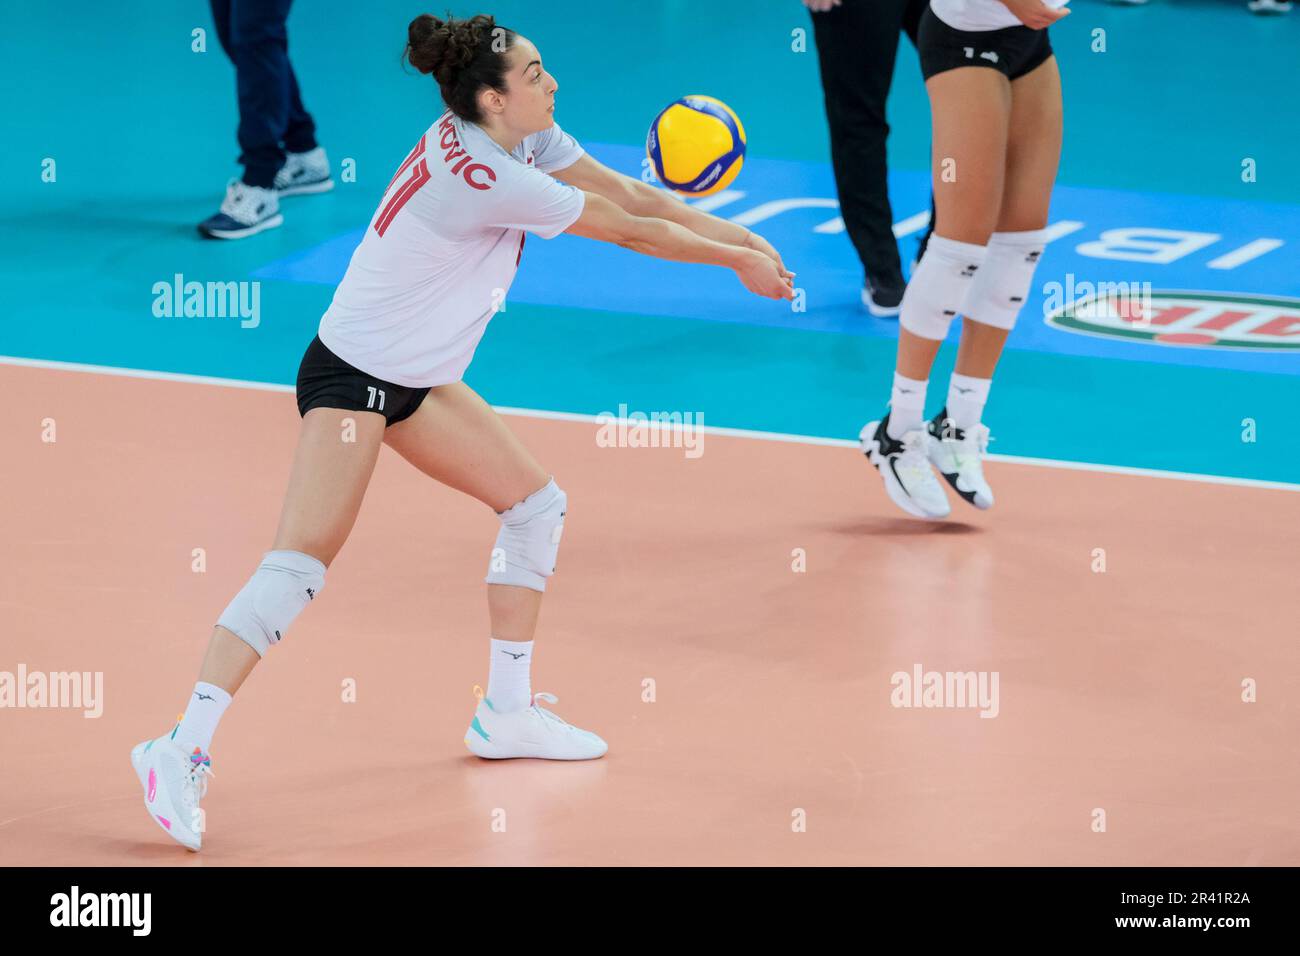 Andrea Mitrovic of Canada in action during the DHL Test Match Tournament women’s volleyball between Italy and Canada at Palazzetto dello Sport. Final score; Italy 3:1 Canada. Stock Photo